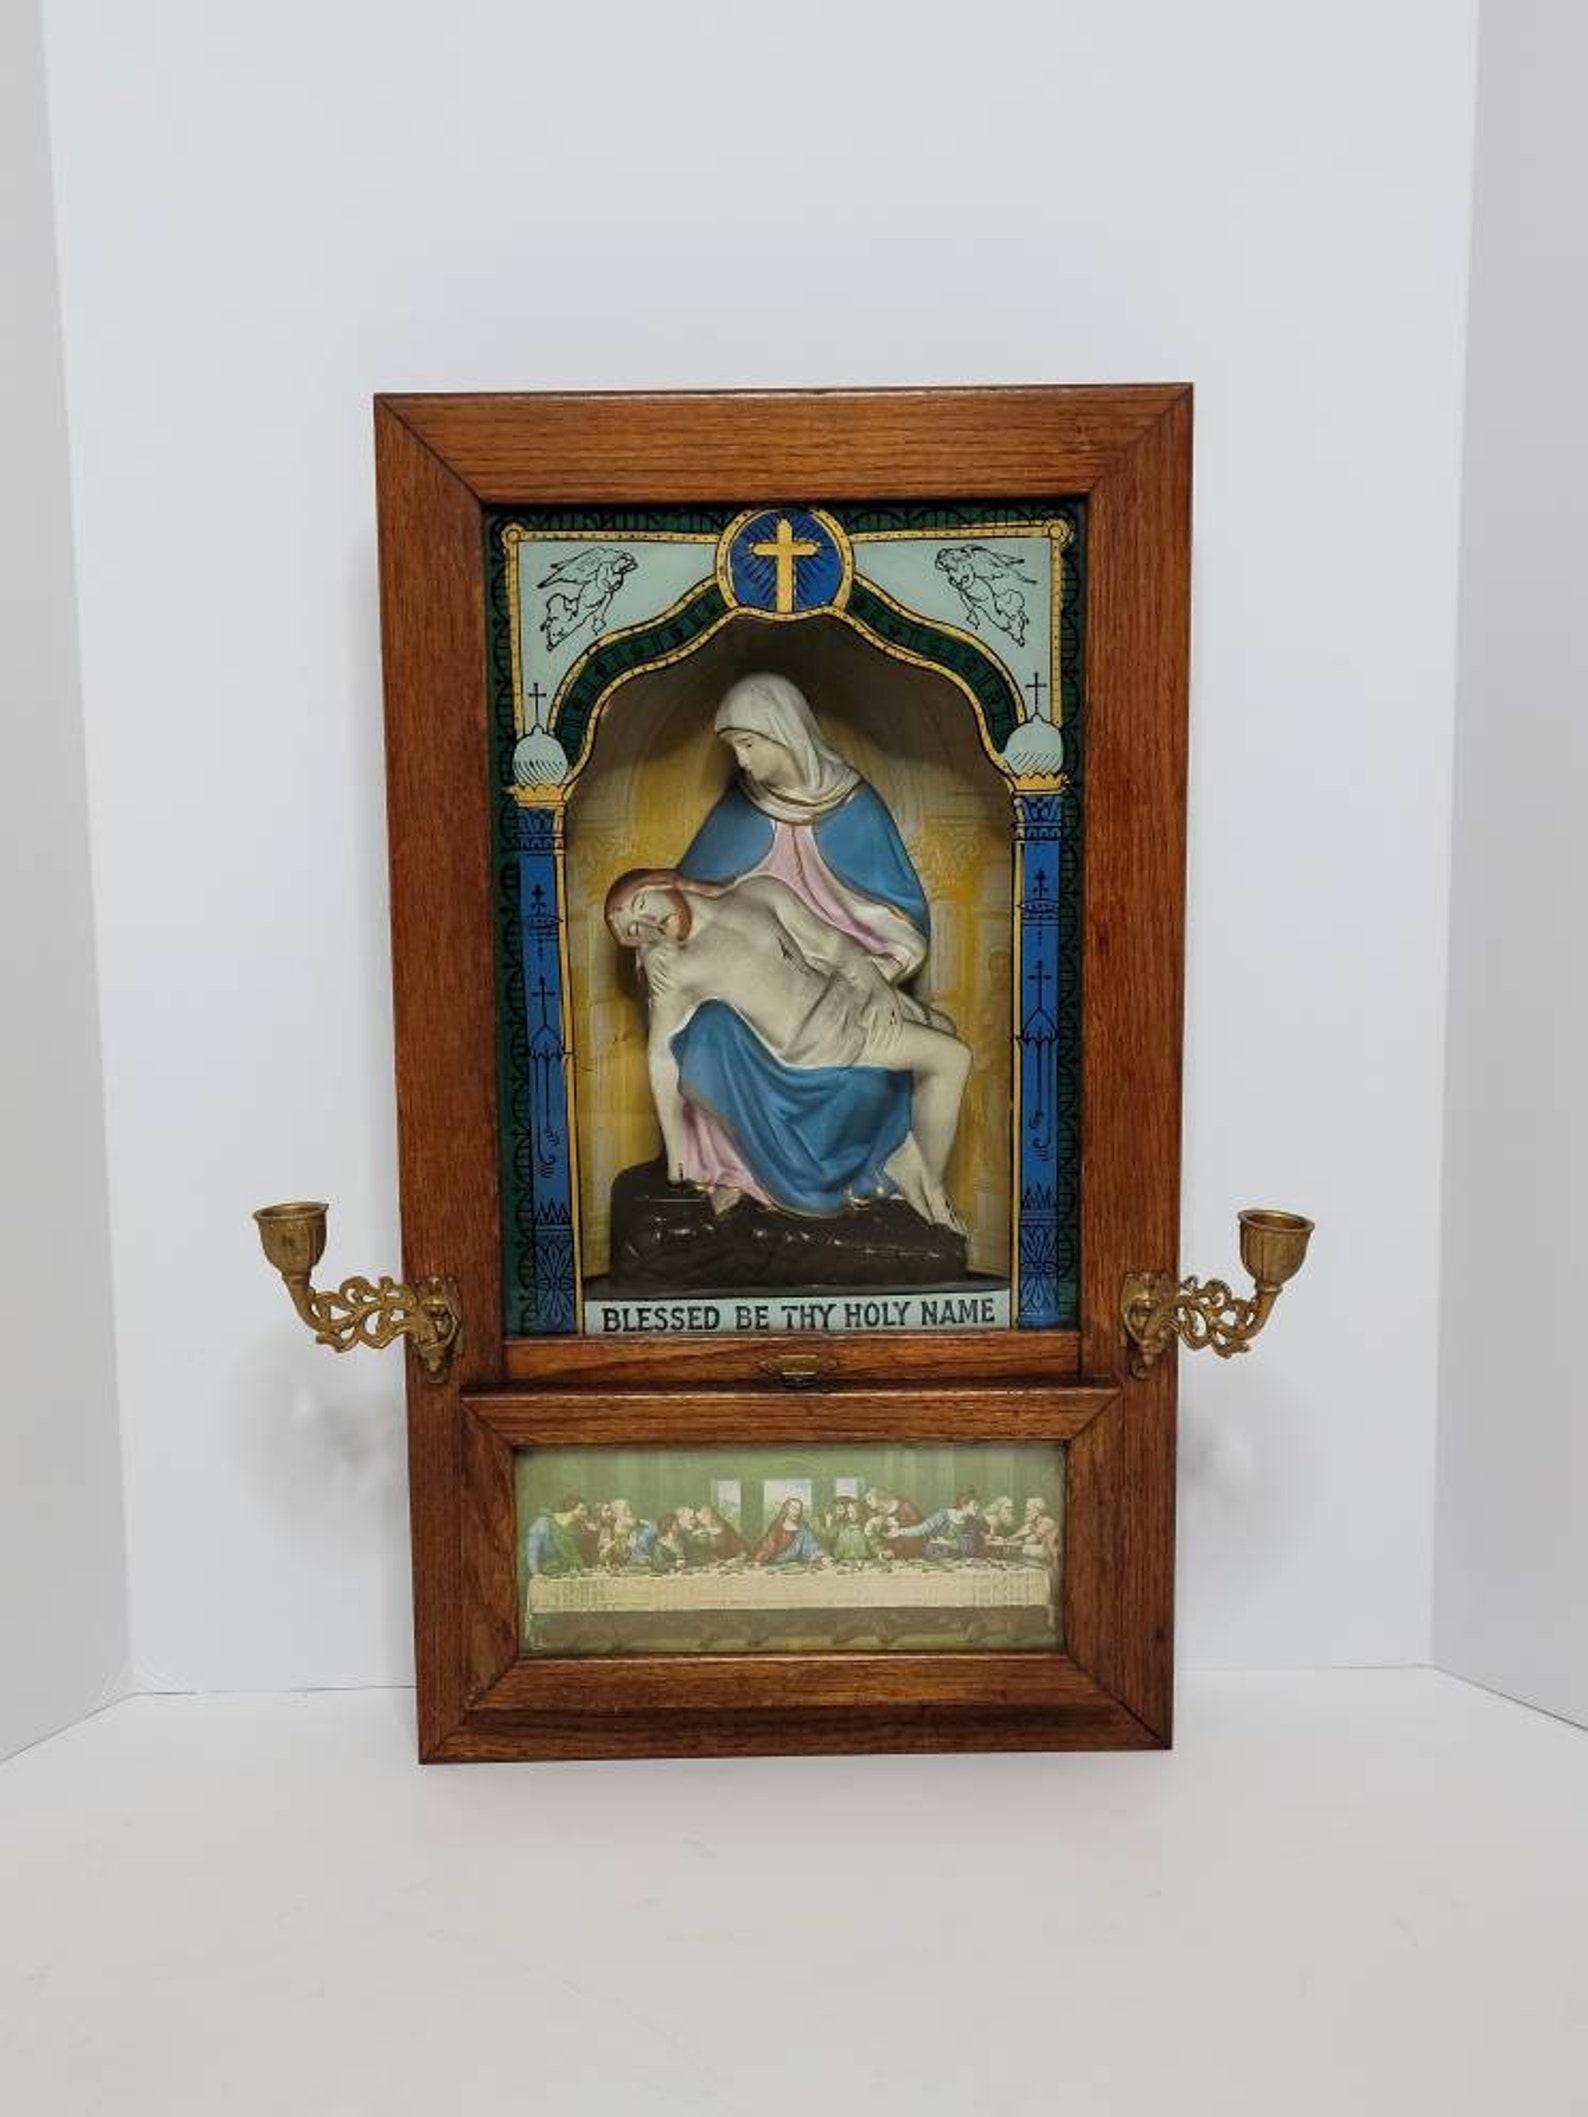 An antique, circa 1910, Catholic Eucharist (also called Holy Communion) sick call wooden shadow box, used to give a person who is dying last rites in the Catholic religion.

This early 20th century icon for Catholic homes features a solid oak